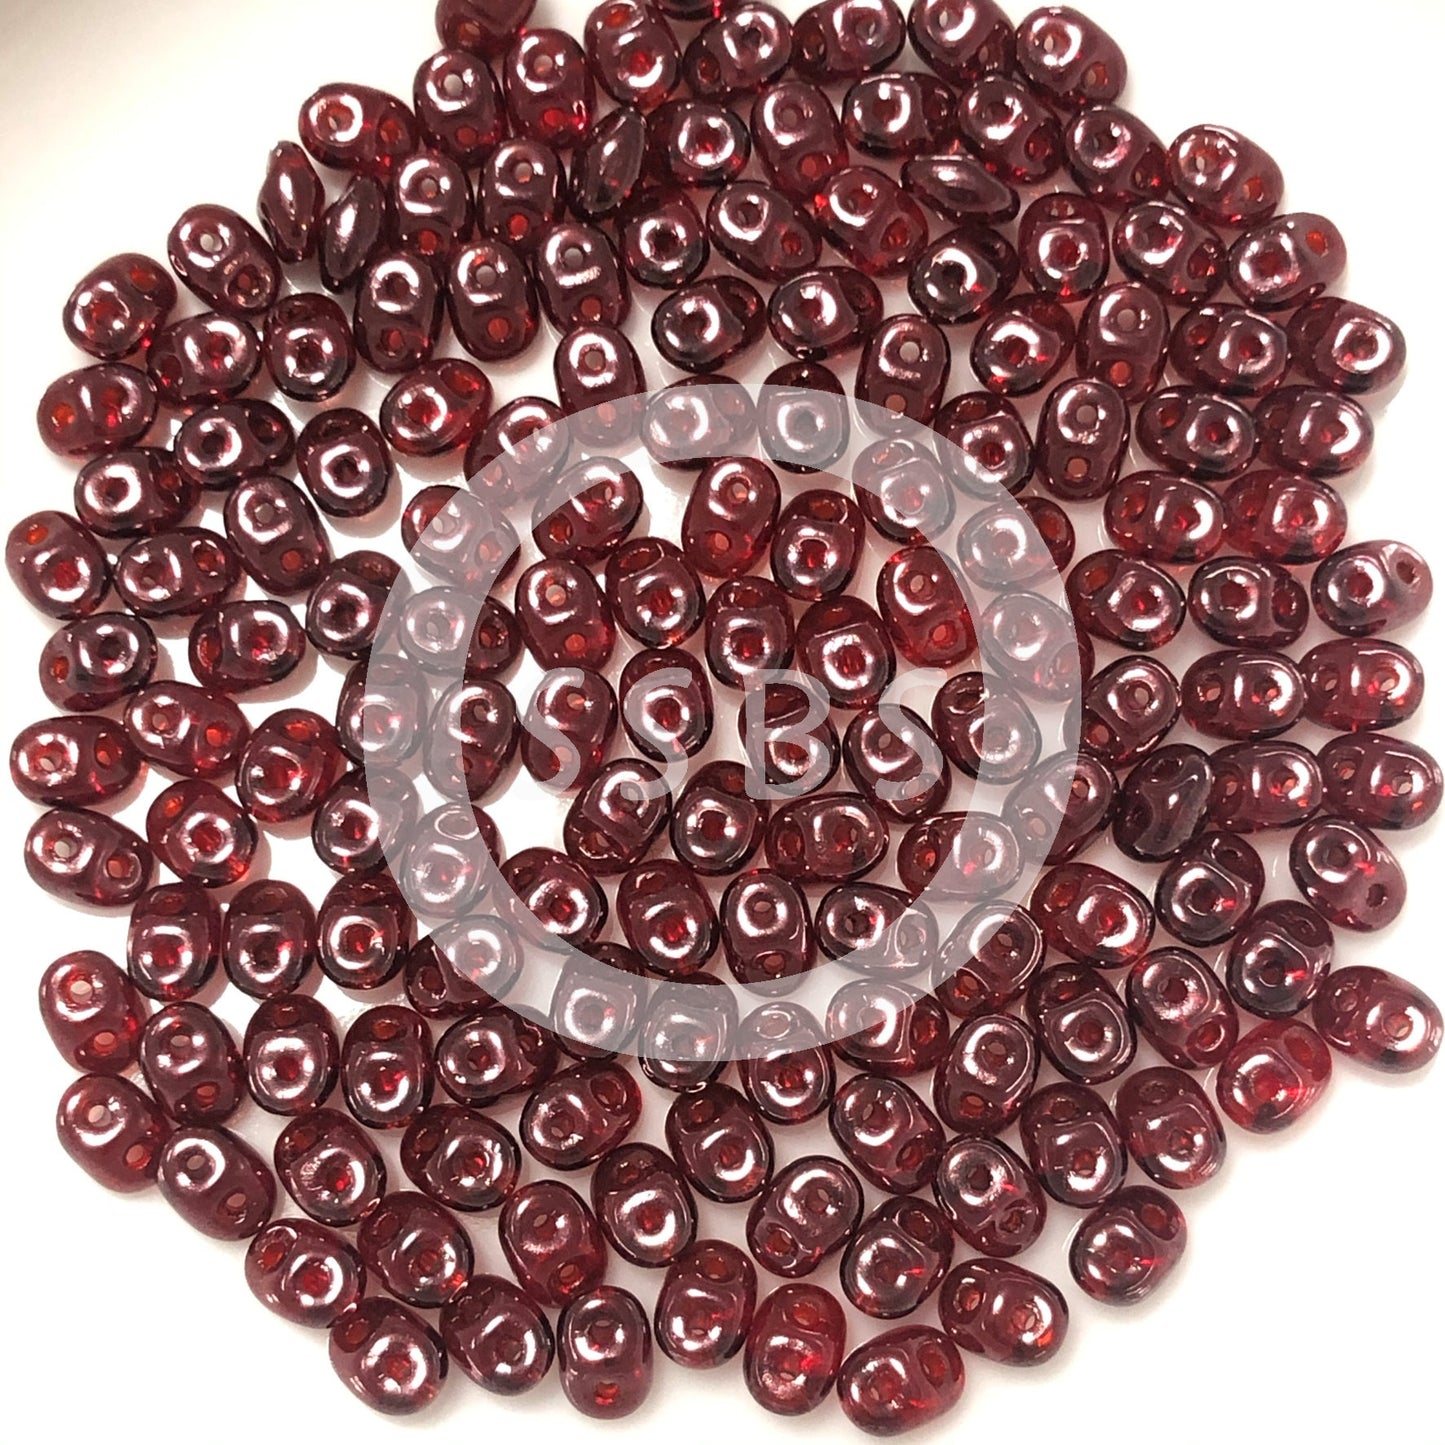 Matubo Superduo 2.5 x 5 mm 90080-15726  Red Wine Beads - 5 or 10 gm